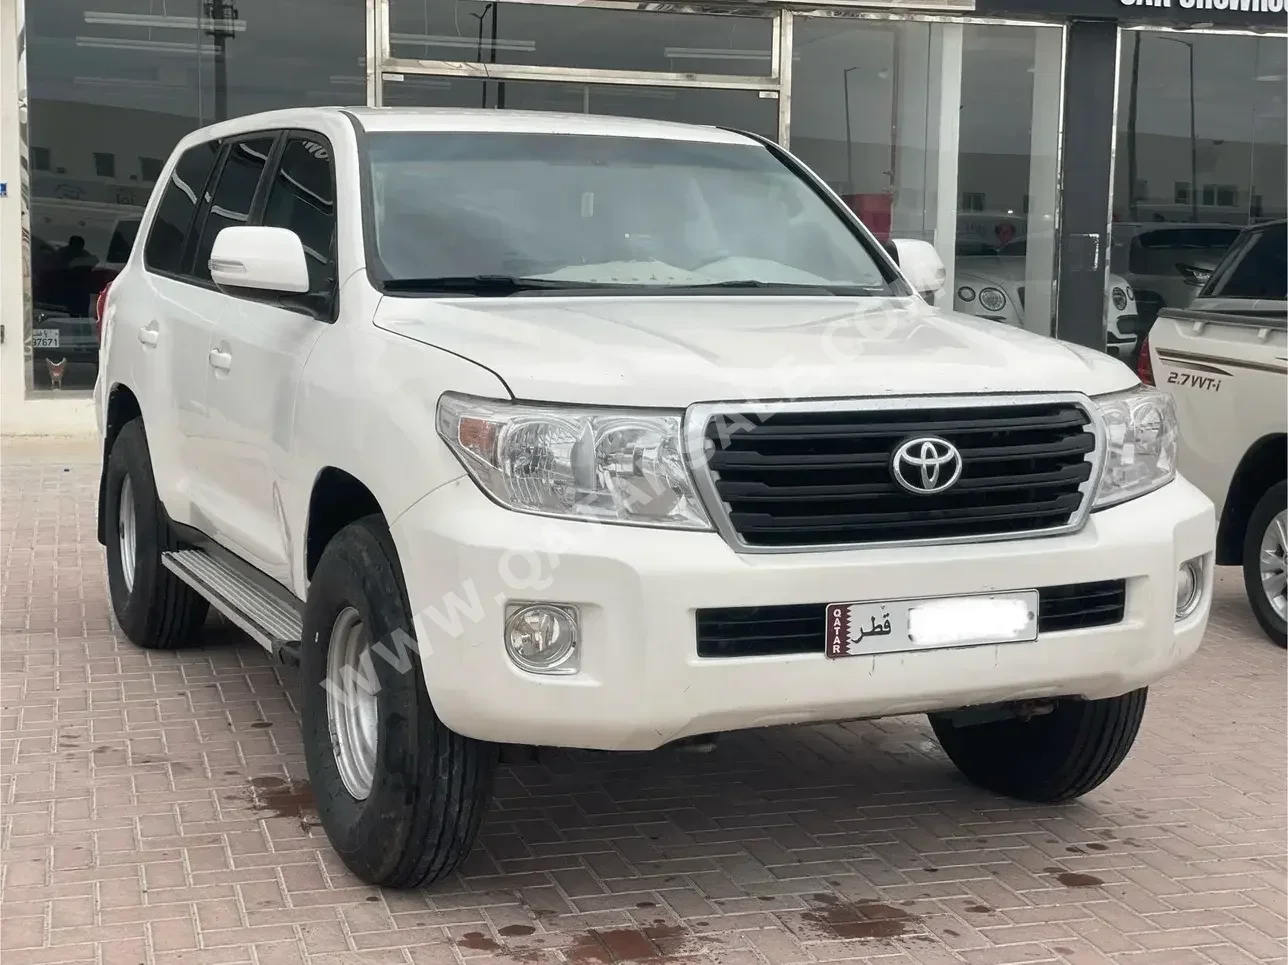 Toyota  Land Cruiser  G  2012  Automatic  490,000 Km  6 Cylinder  Four Wheel Drive (4WD)  SUV  White